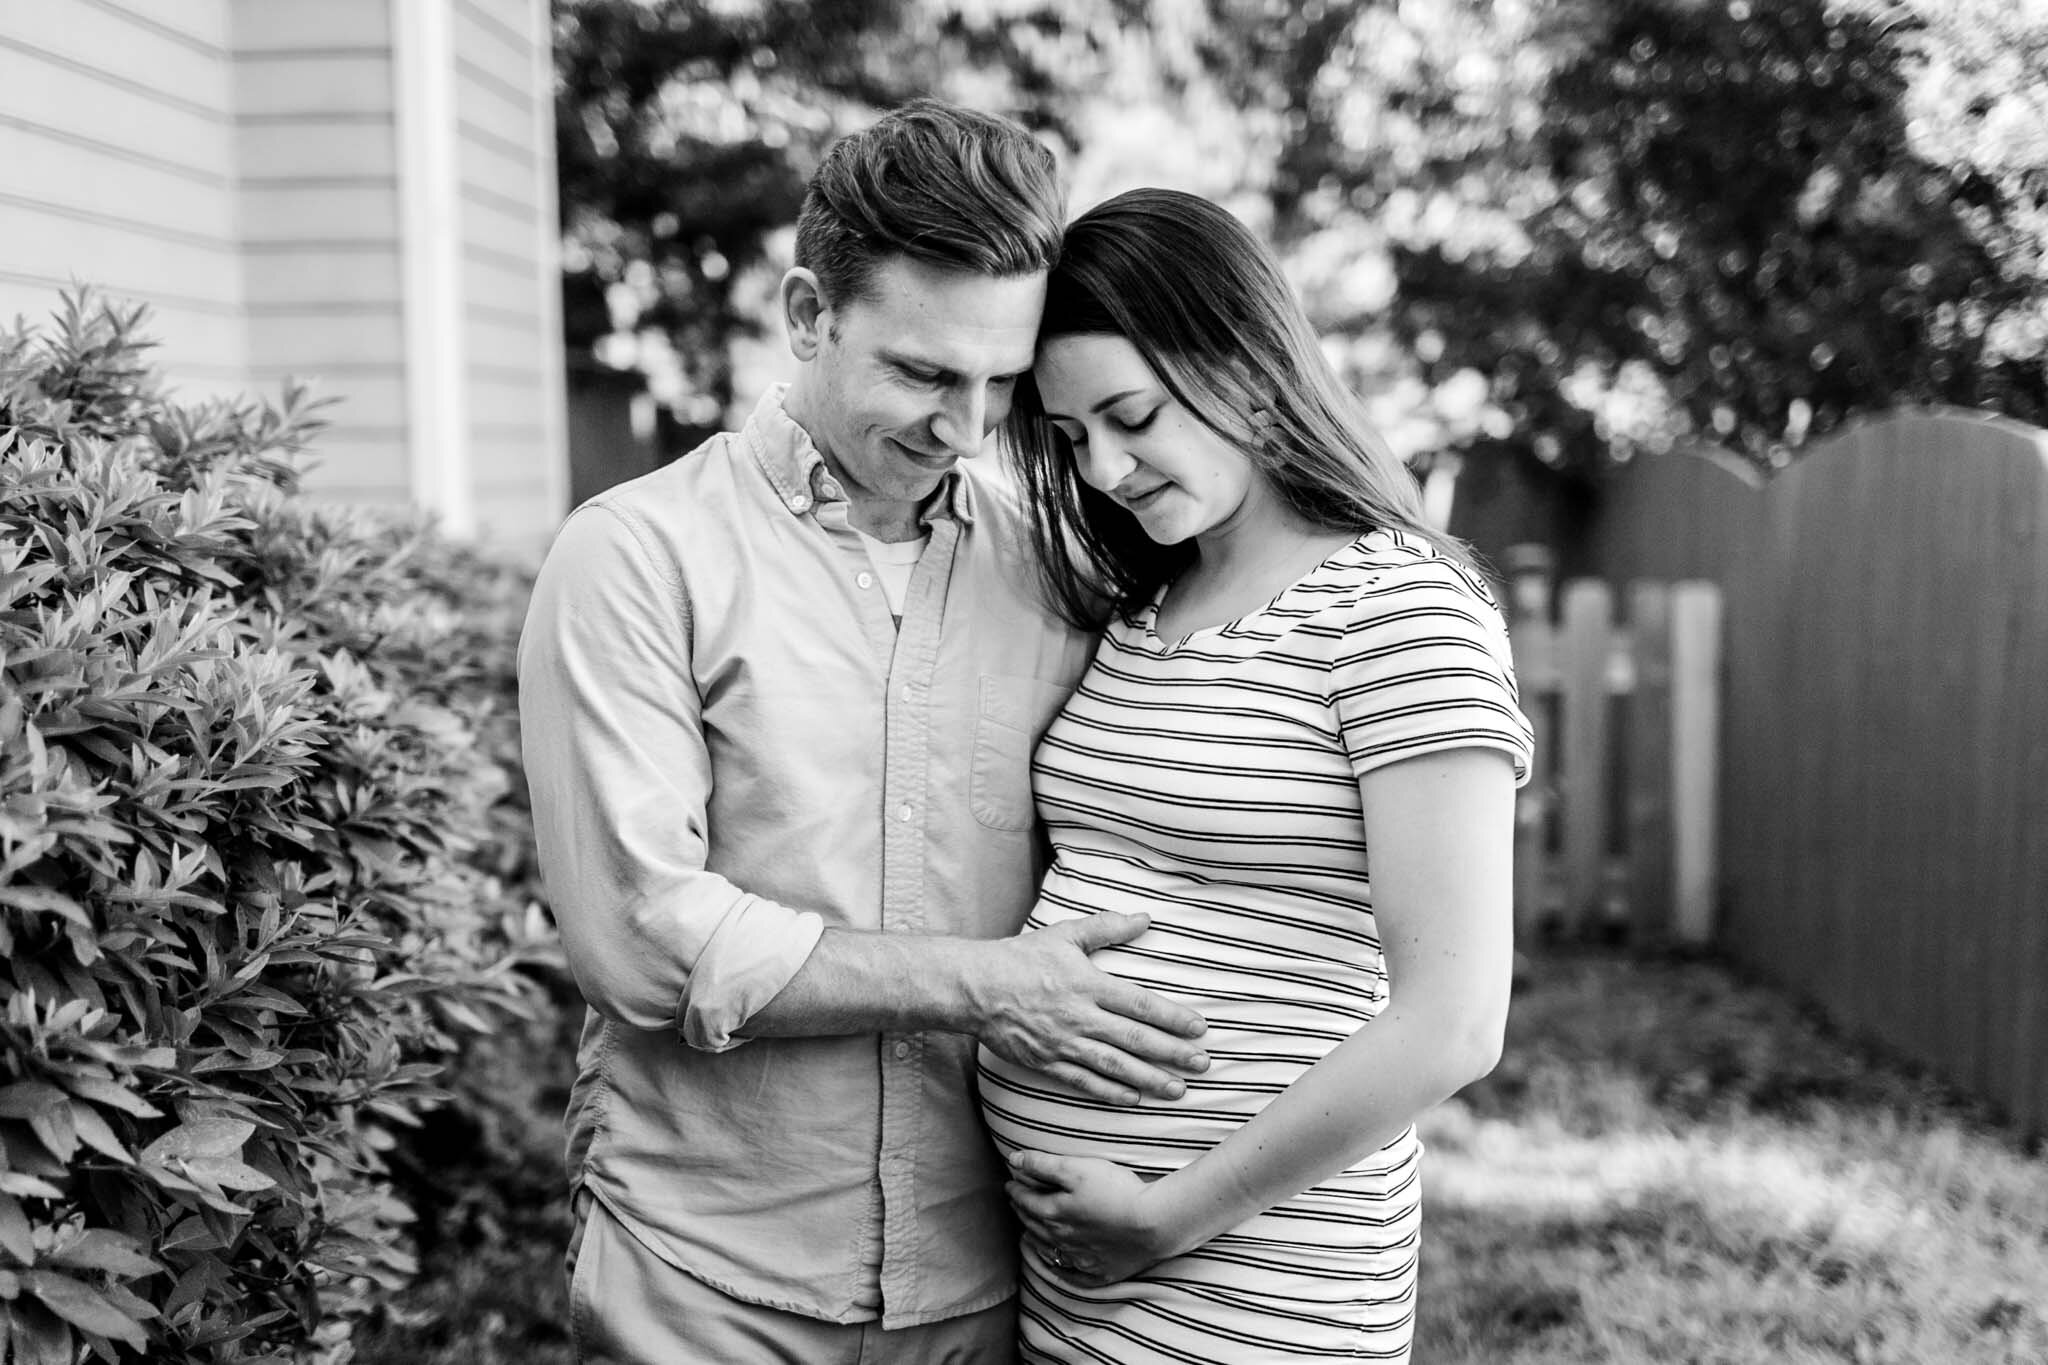 Durham Maternity Photographer | By G. Lin Photography | Black and white maternity photo of couple touching mother's belly